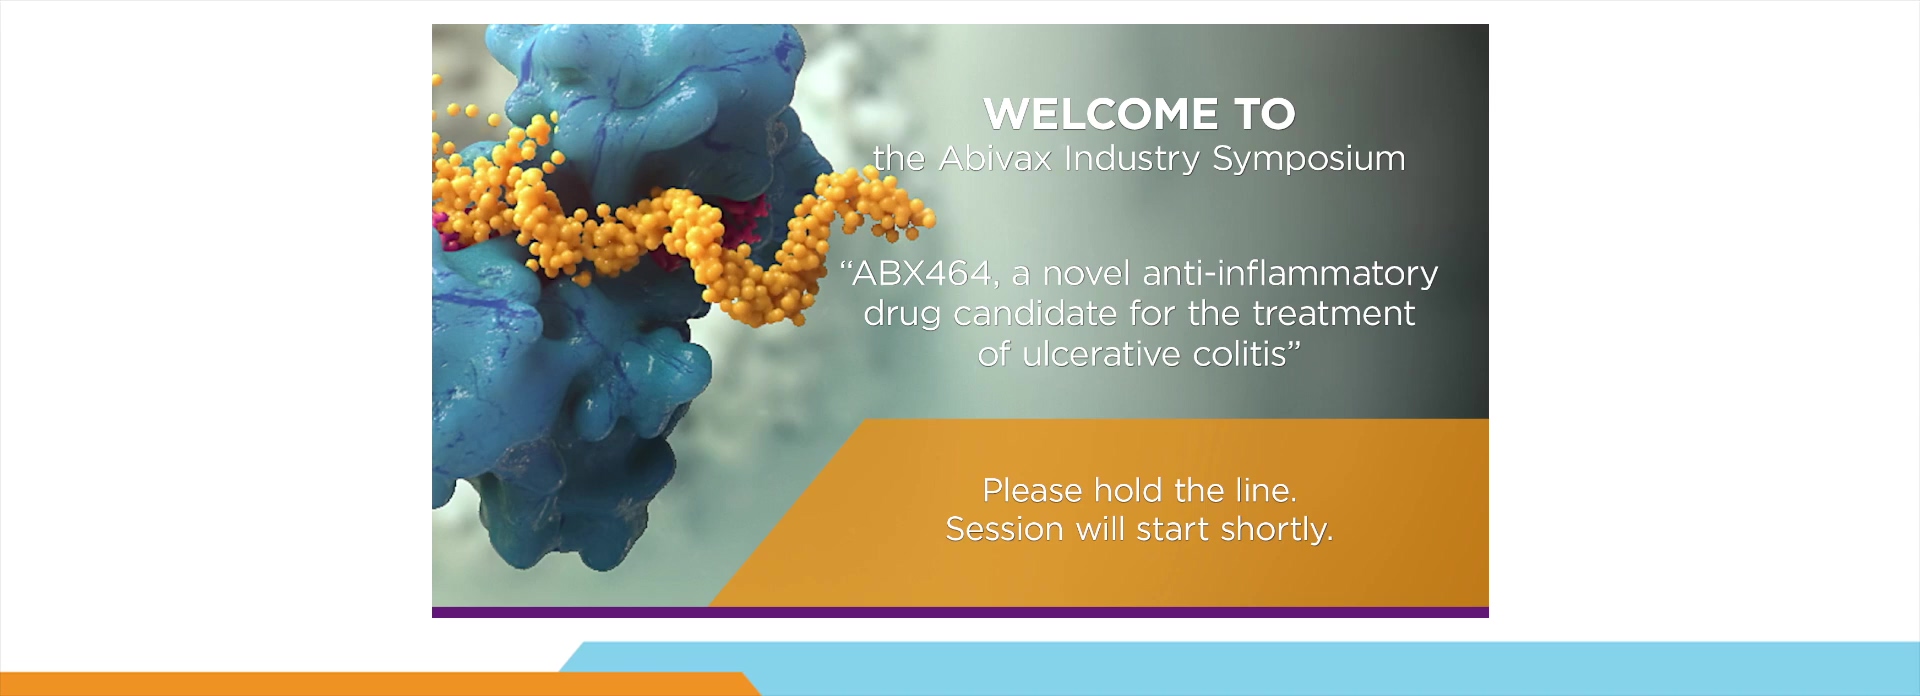 ABX464, a novel anti-inflammatory drug-candidate for the treatment of ulcerative colitis (Abivax)